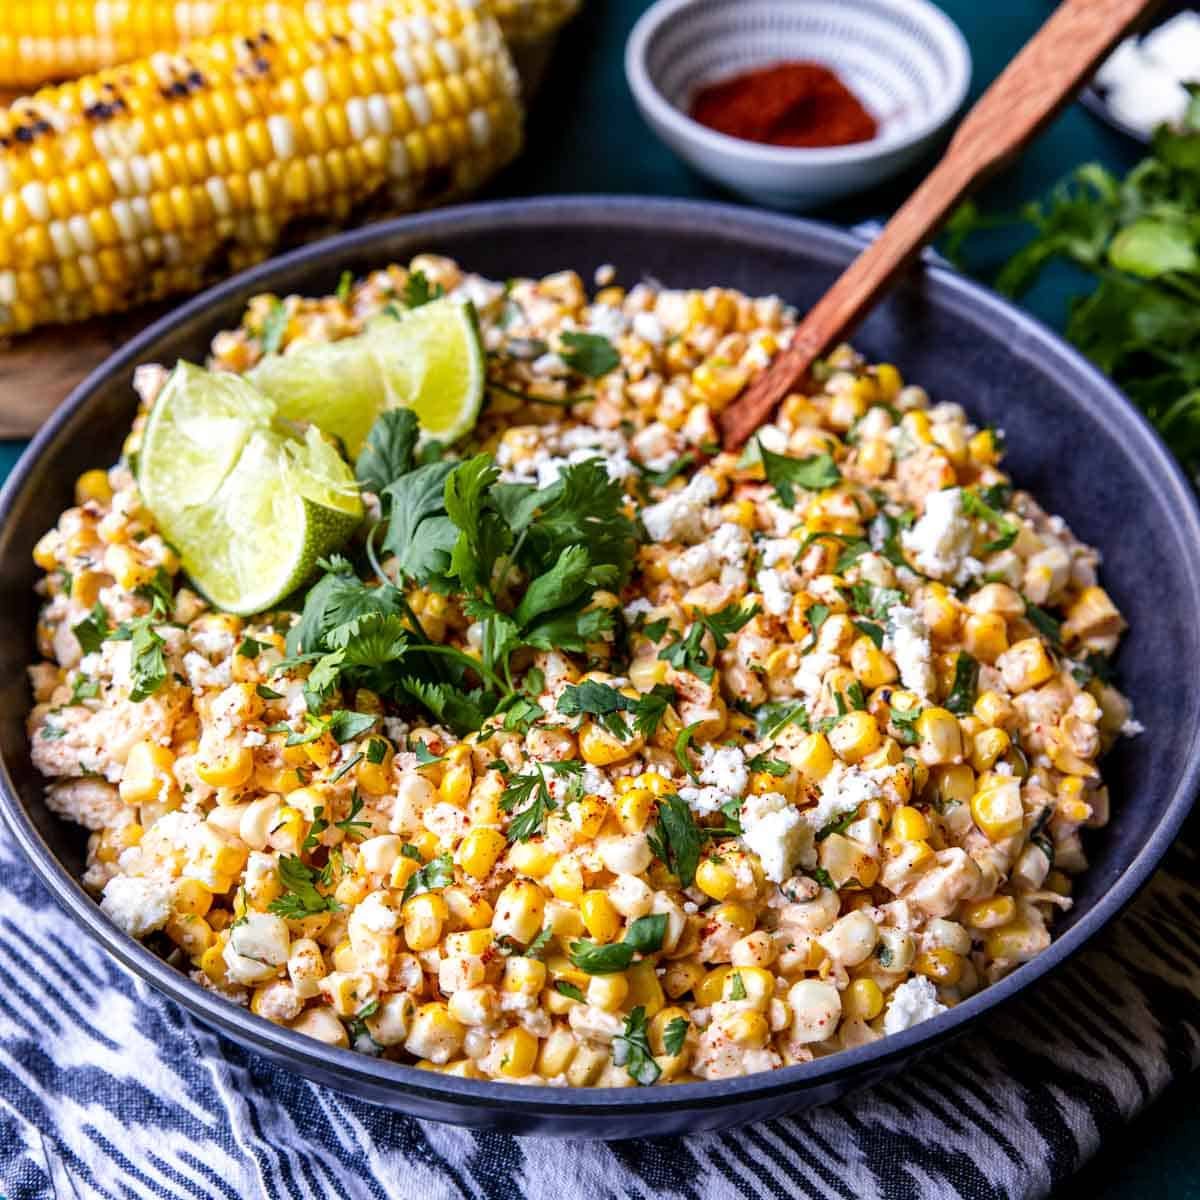 a bowl of Street Corn Salad (aka. Esquites) garnished with limes and cilantro